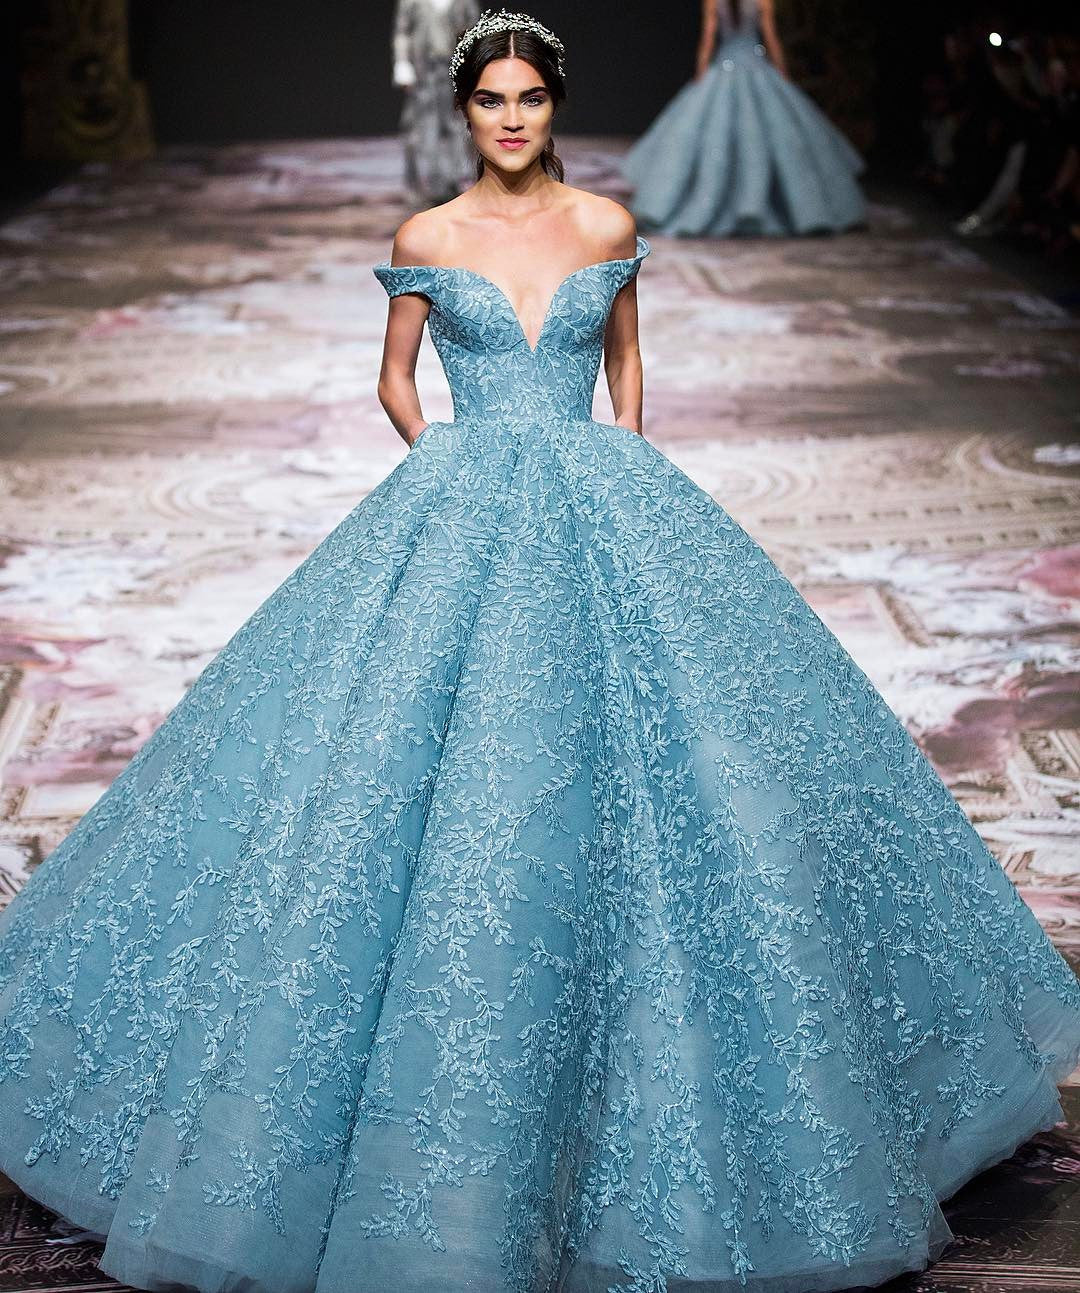 Iconic Michael Cinco gowns are up for sale | PEP.ph